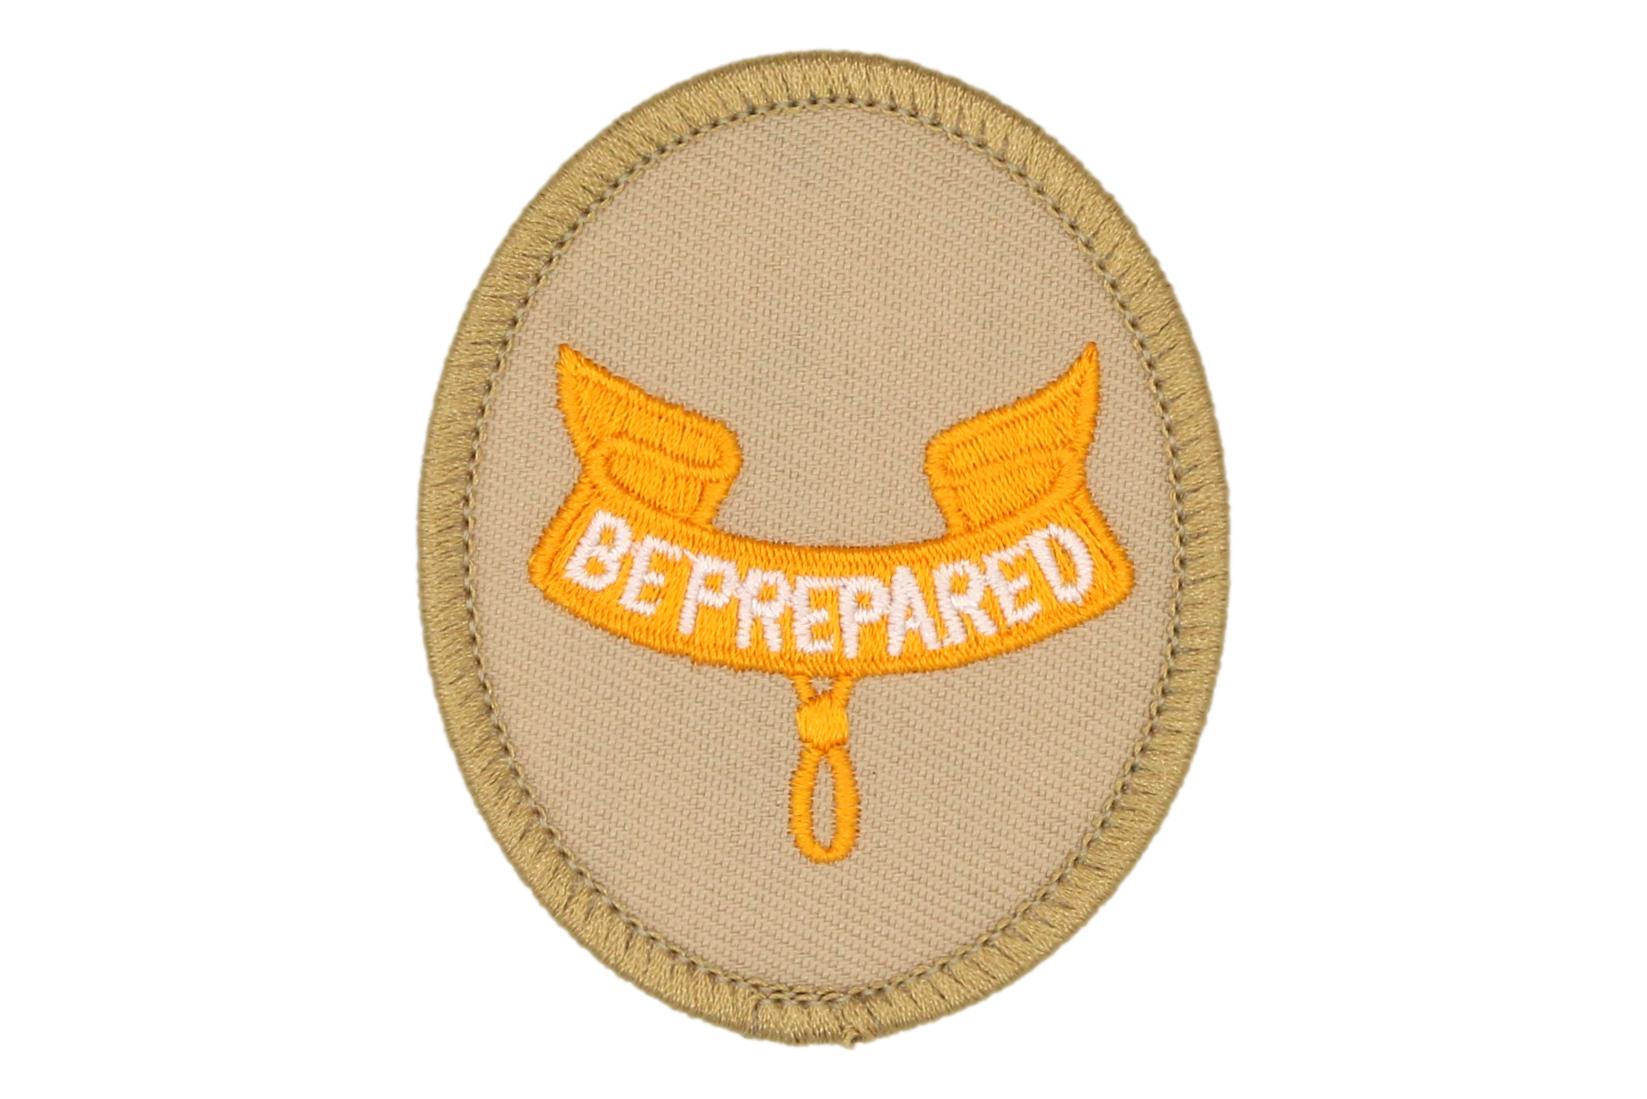 Badge Magic - Patches and Badges - Insignia